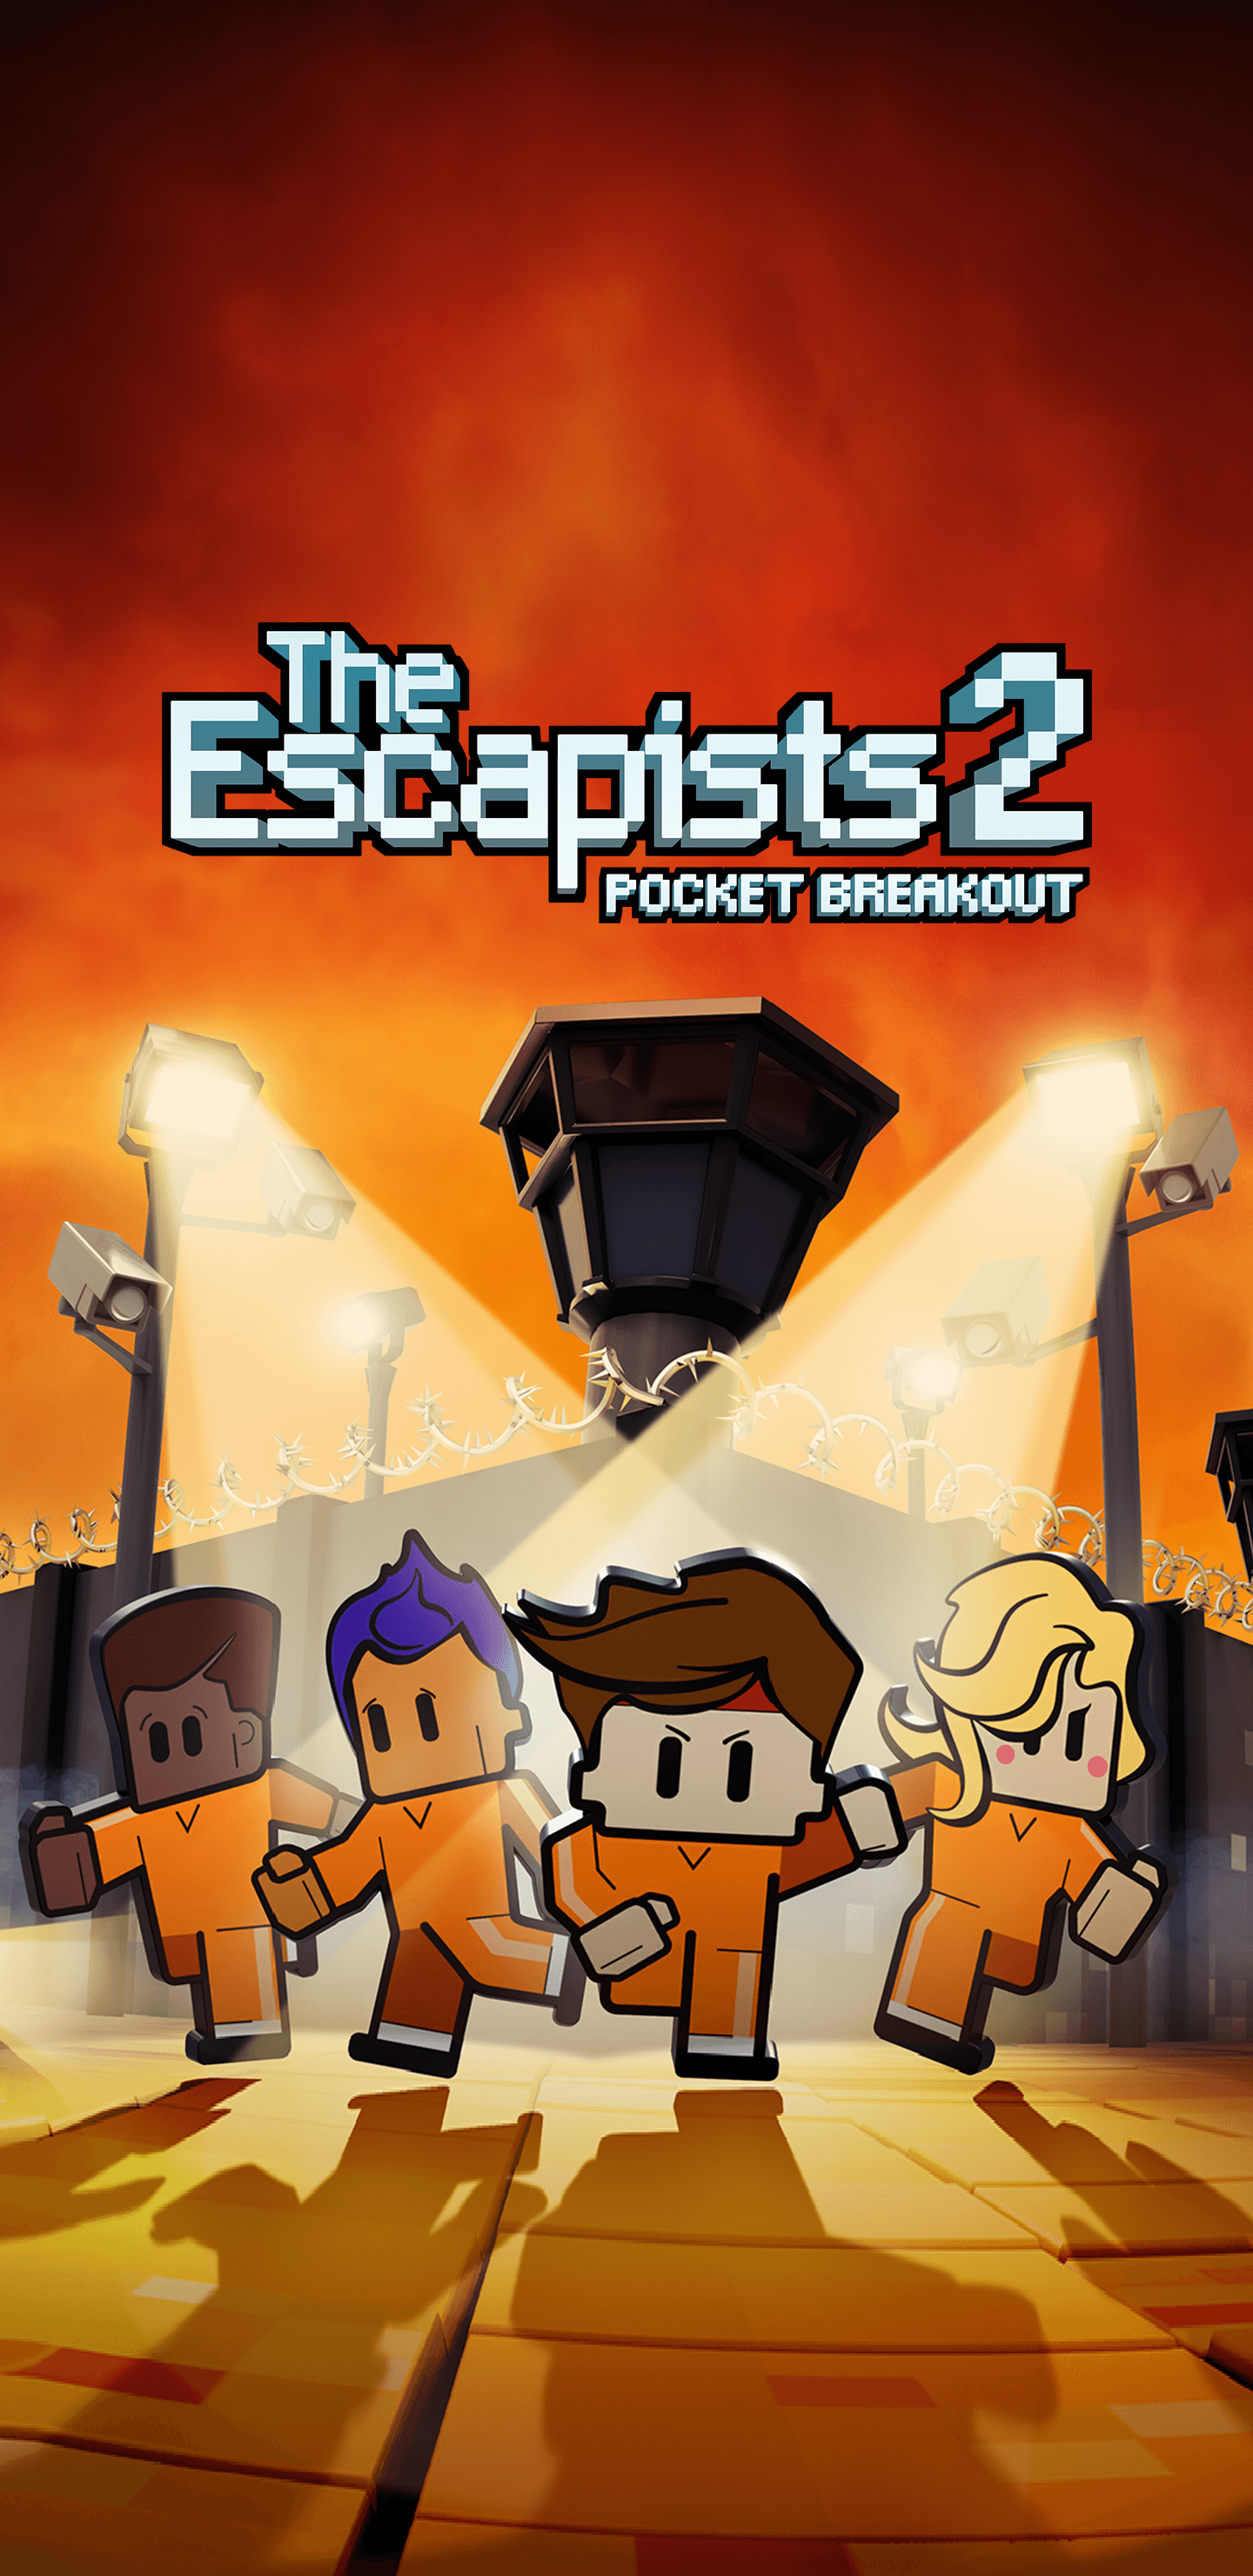 The Escapists 2 is heading to mobile! Group PLC